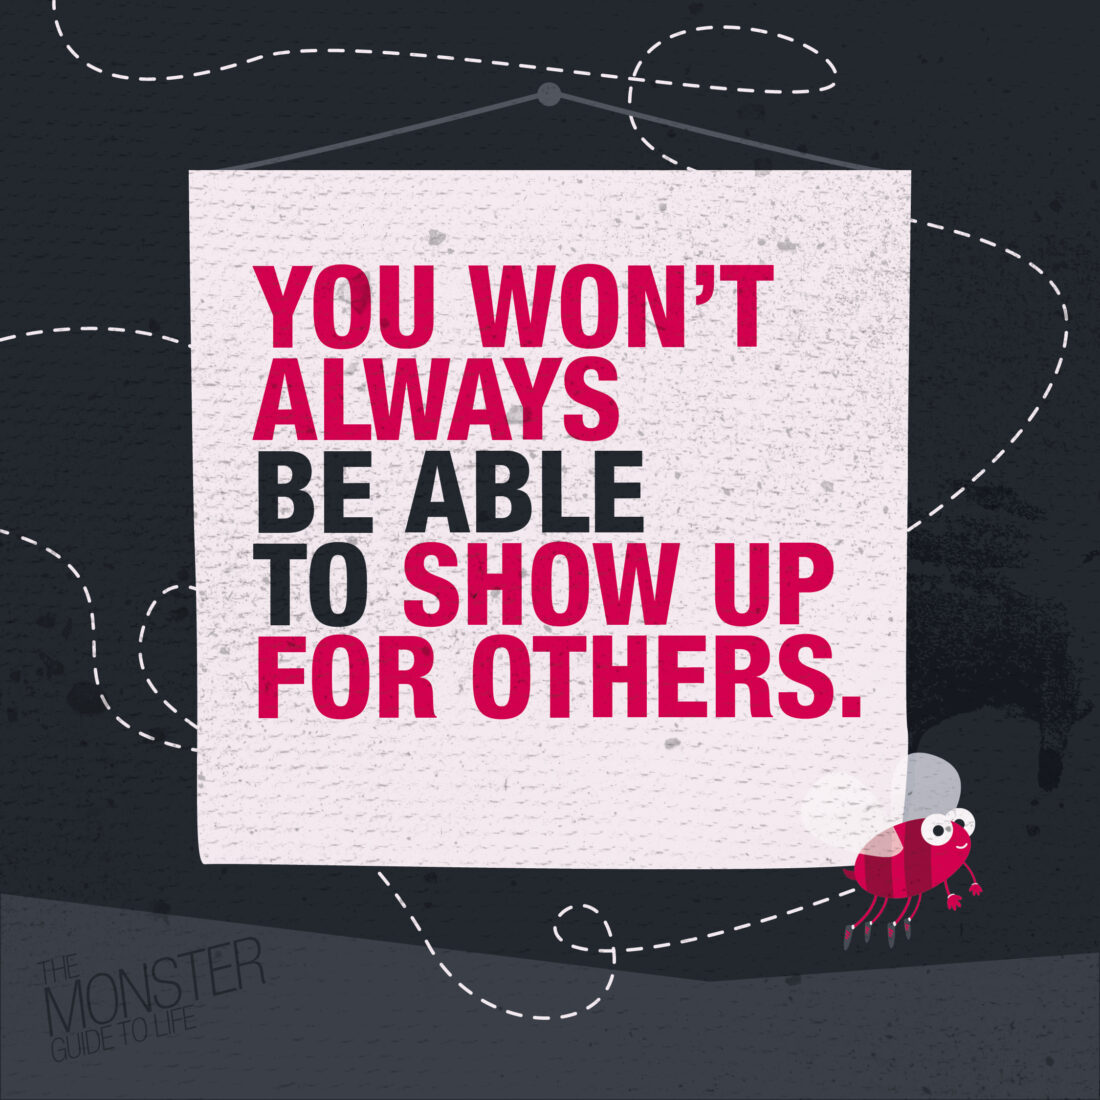 You won't always be able to show up for others